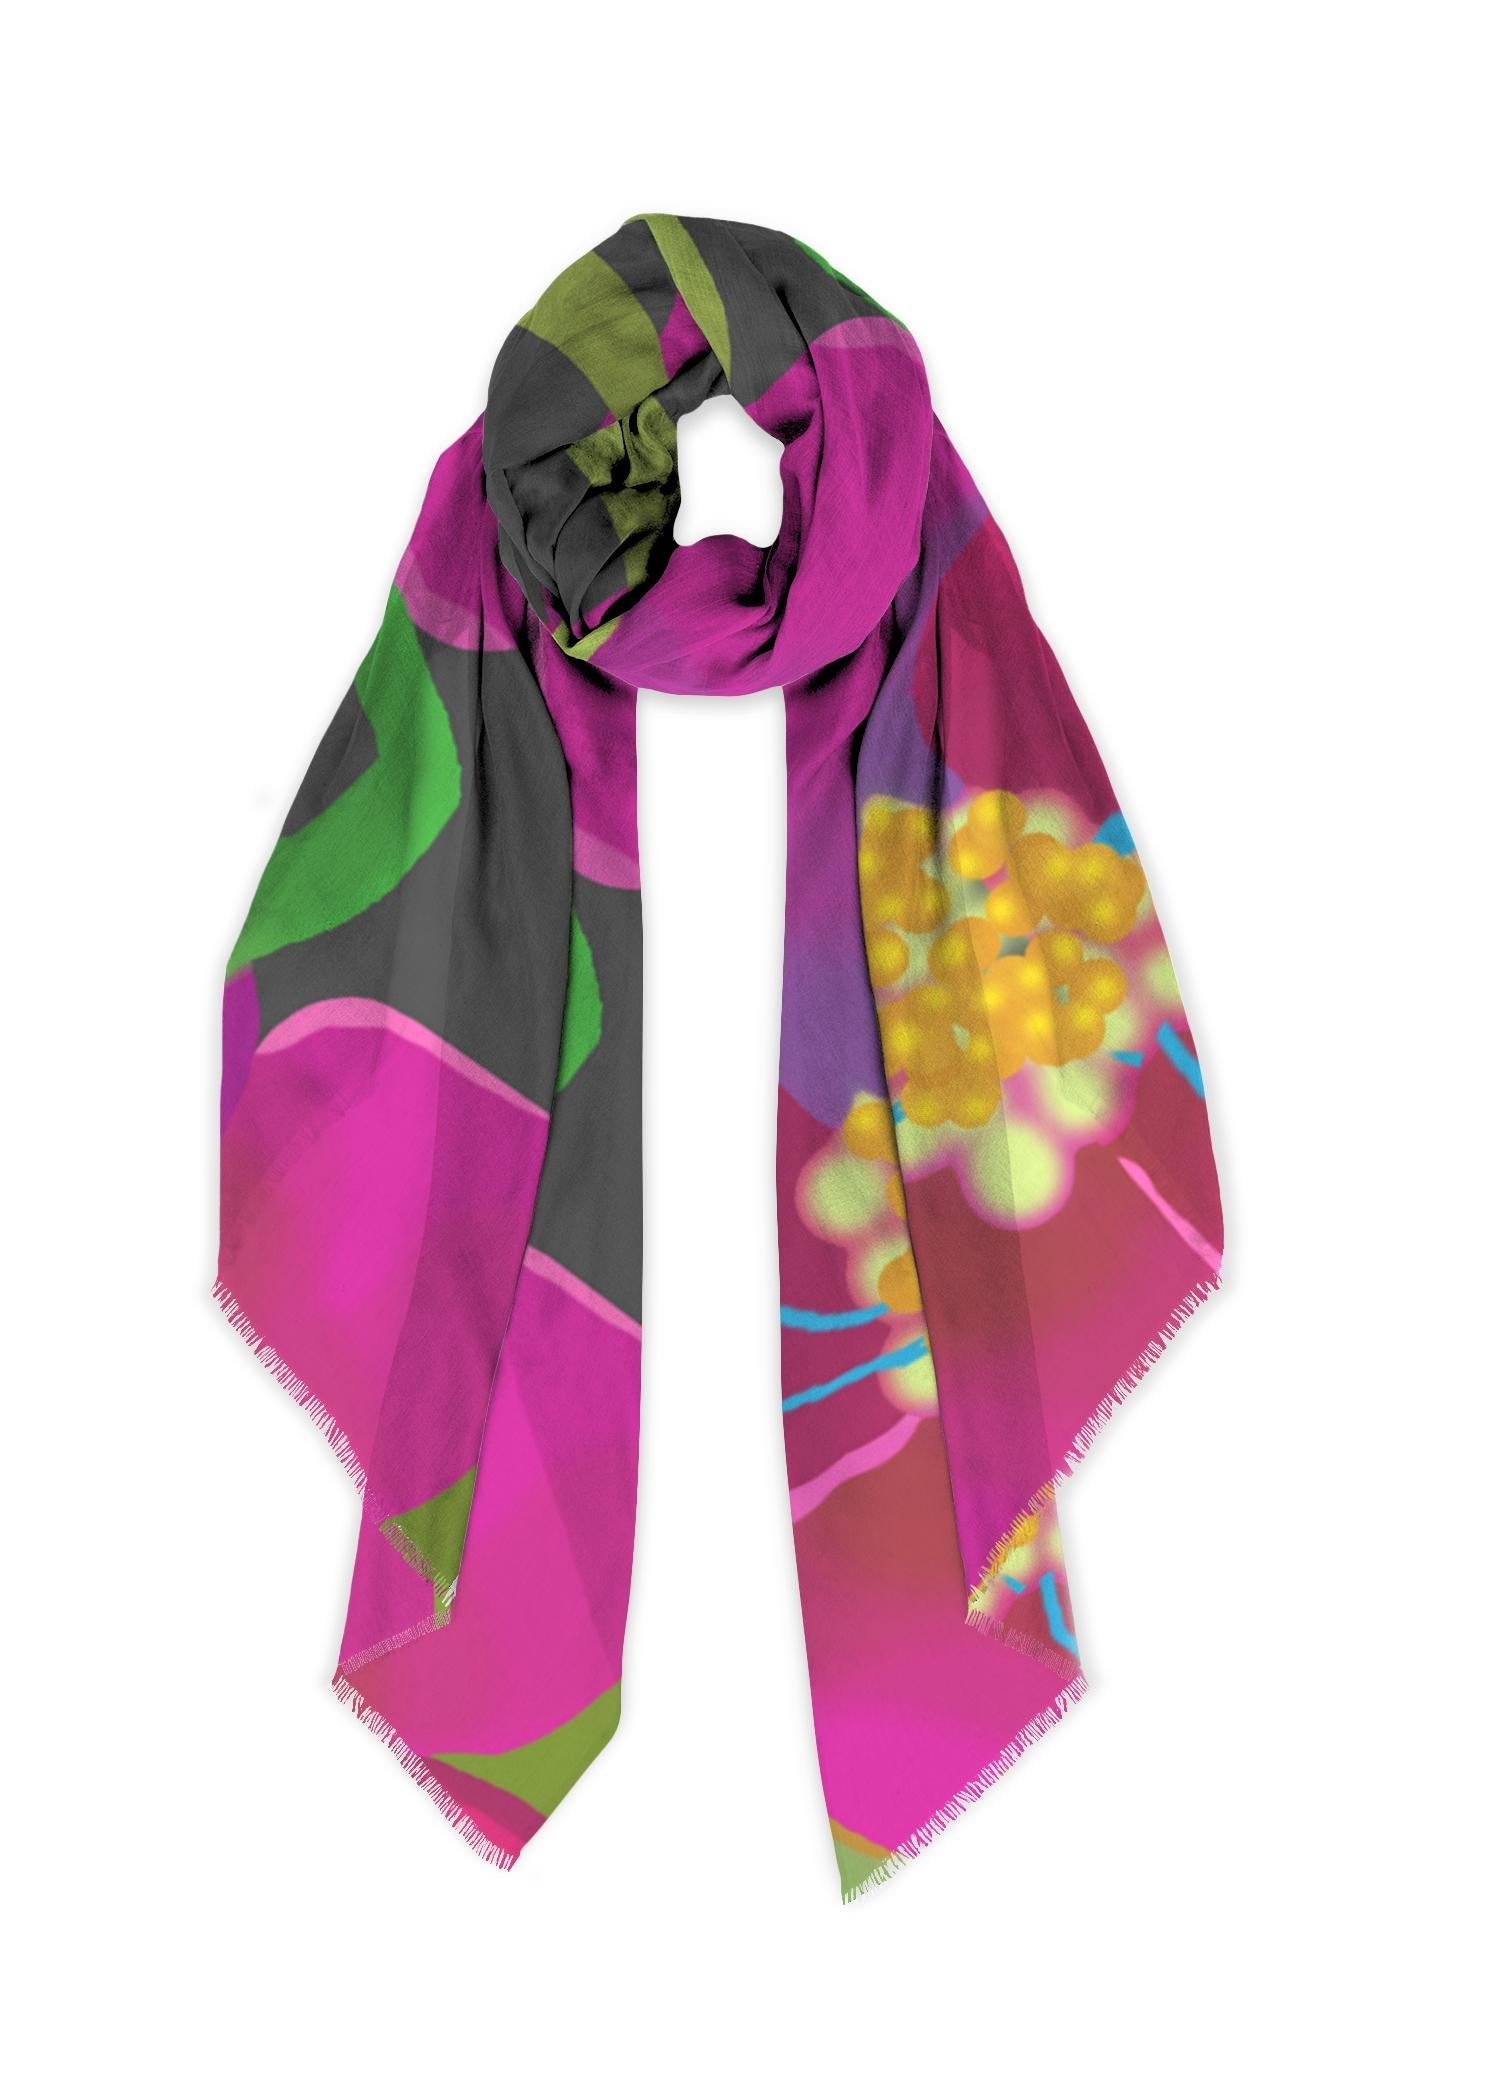 Big scarf, bright floral pattern and a combo of cashmere and silk!  Perfect for plus size.